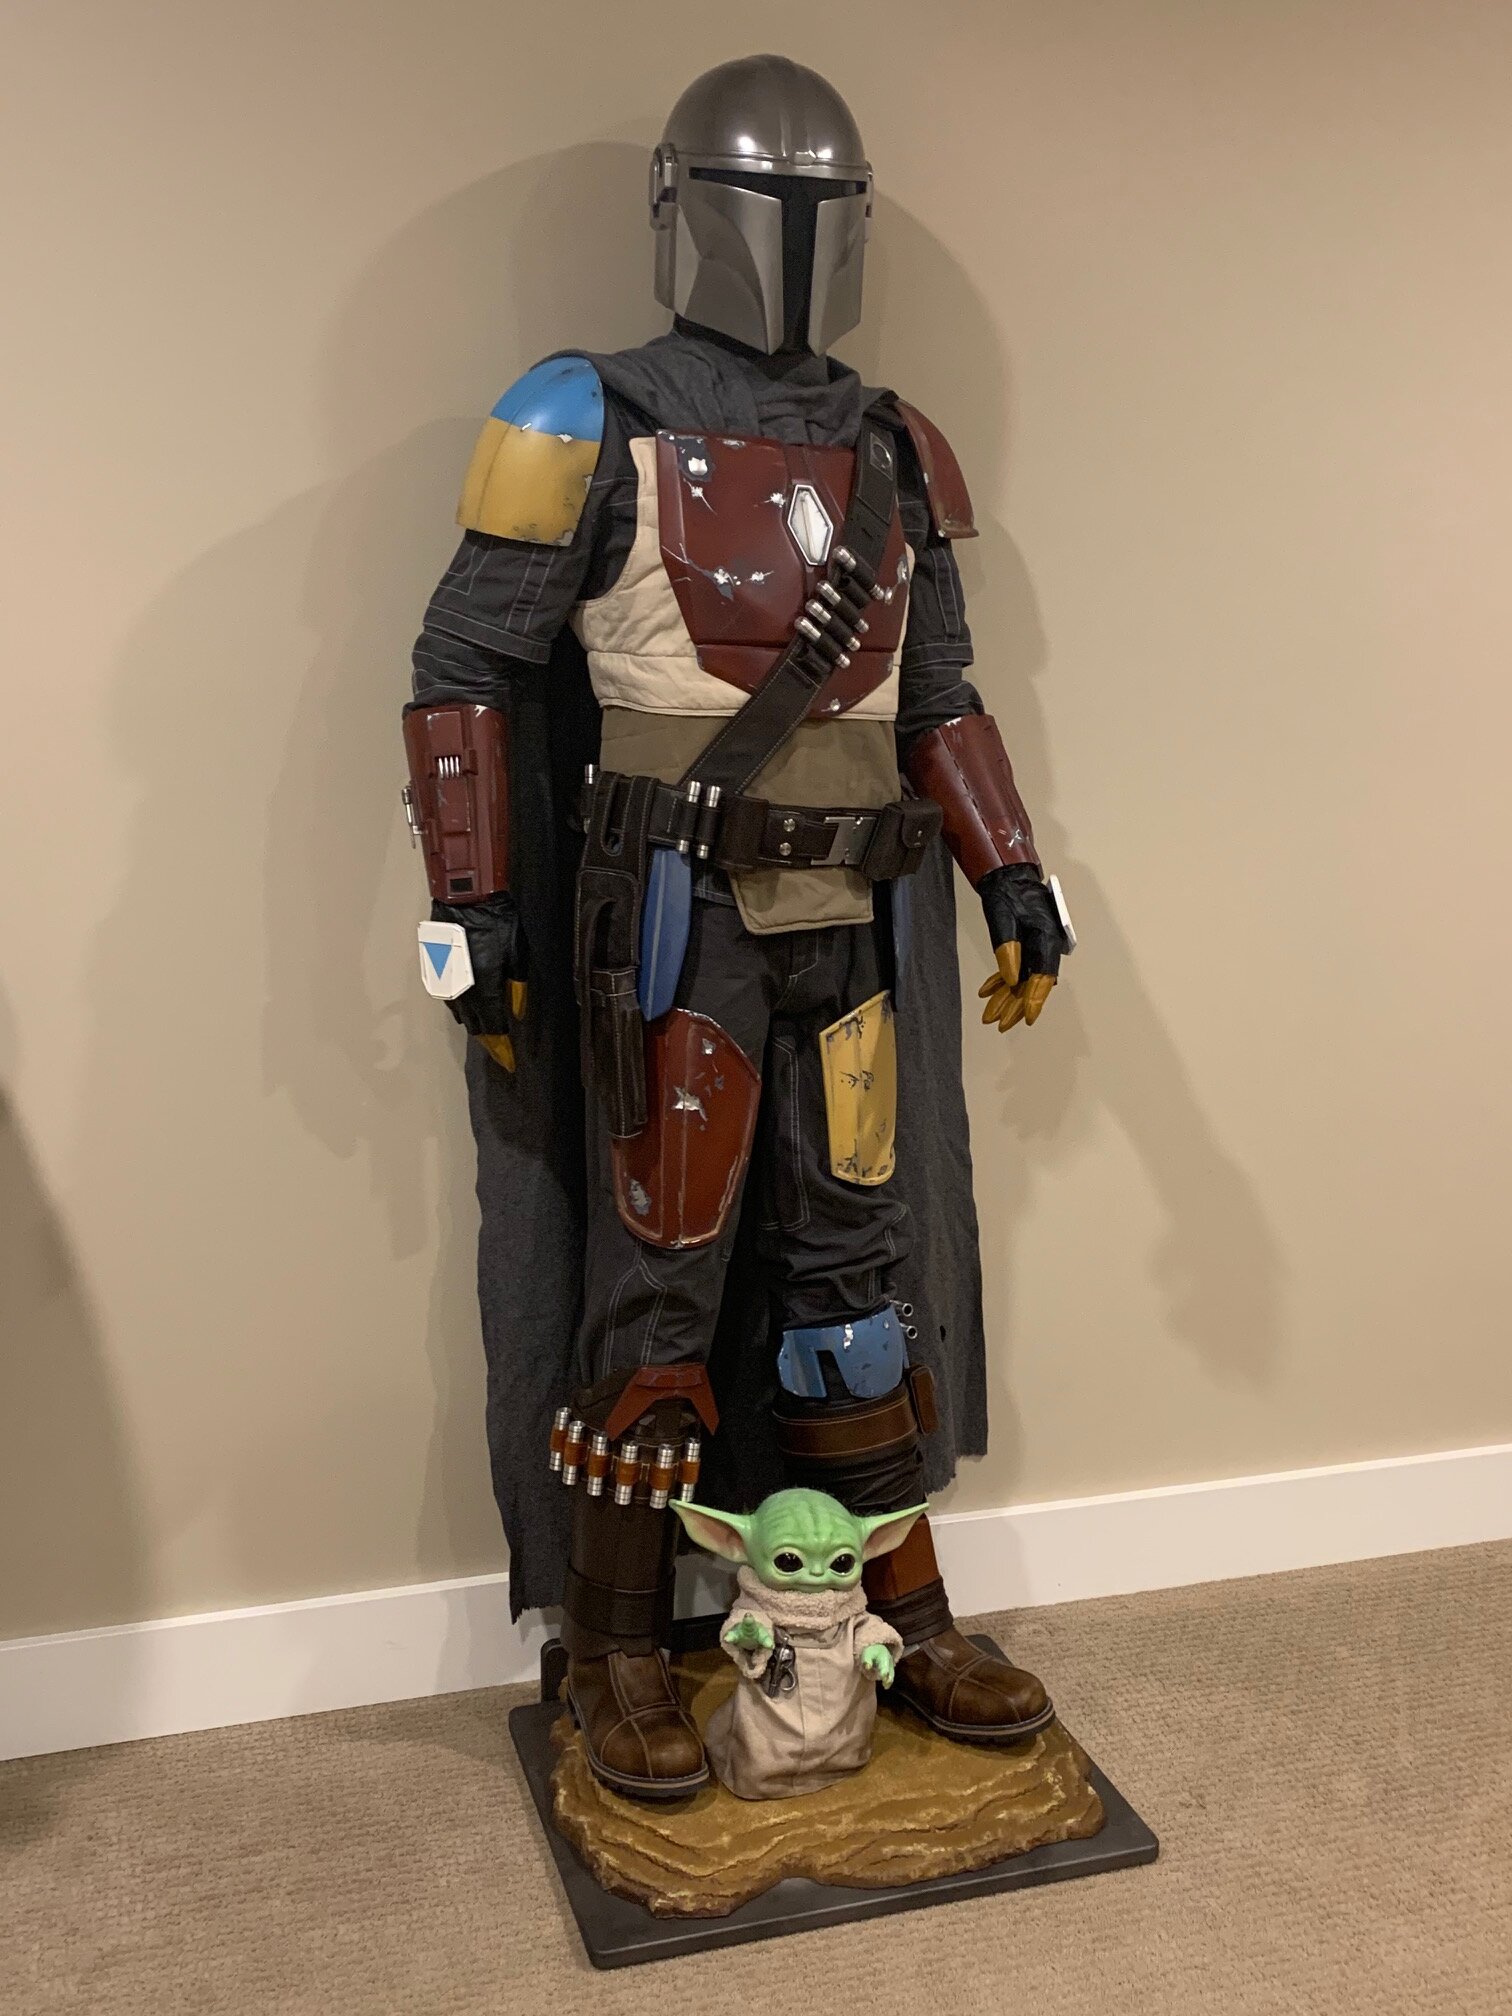 Some Rub n Buff Trouble  Boba Fett Costume and Prop Maker Community - The  Dented Helmet